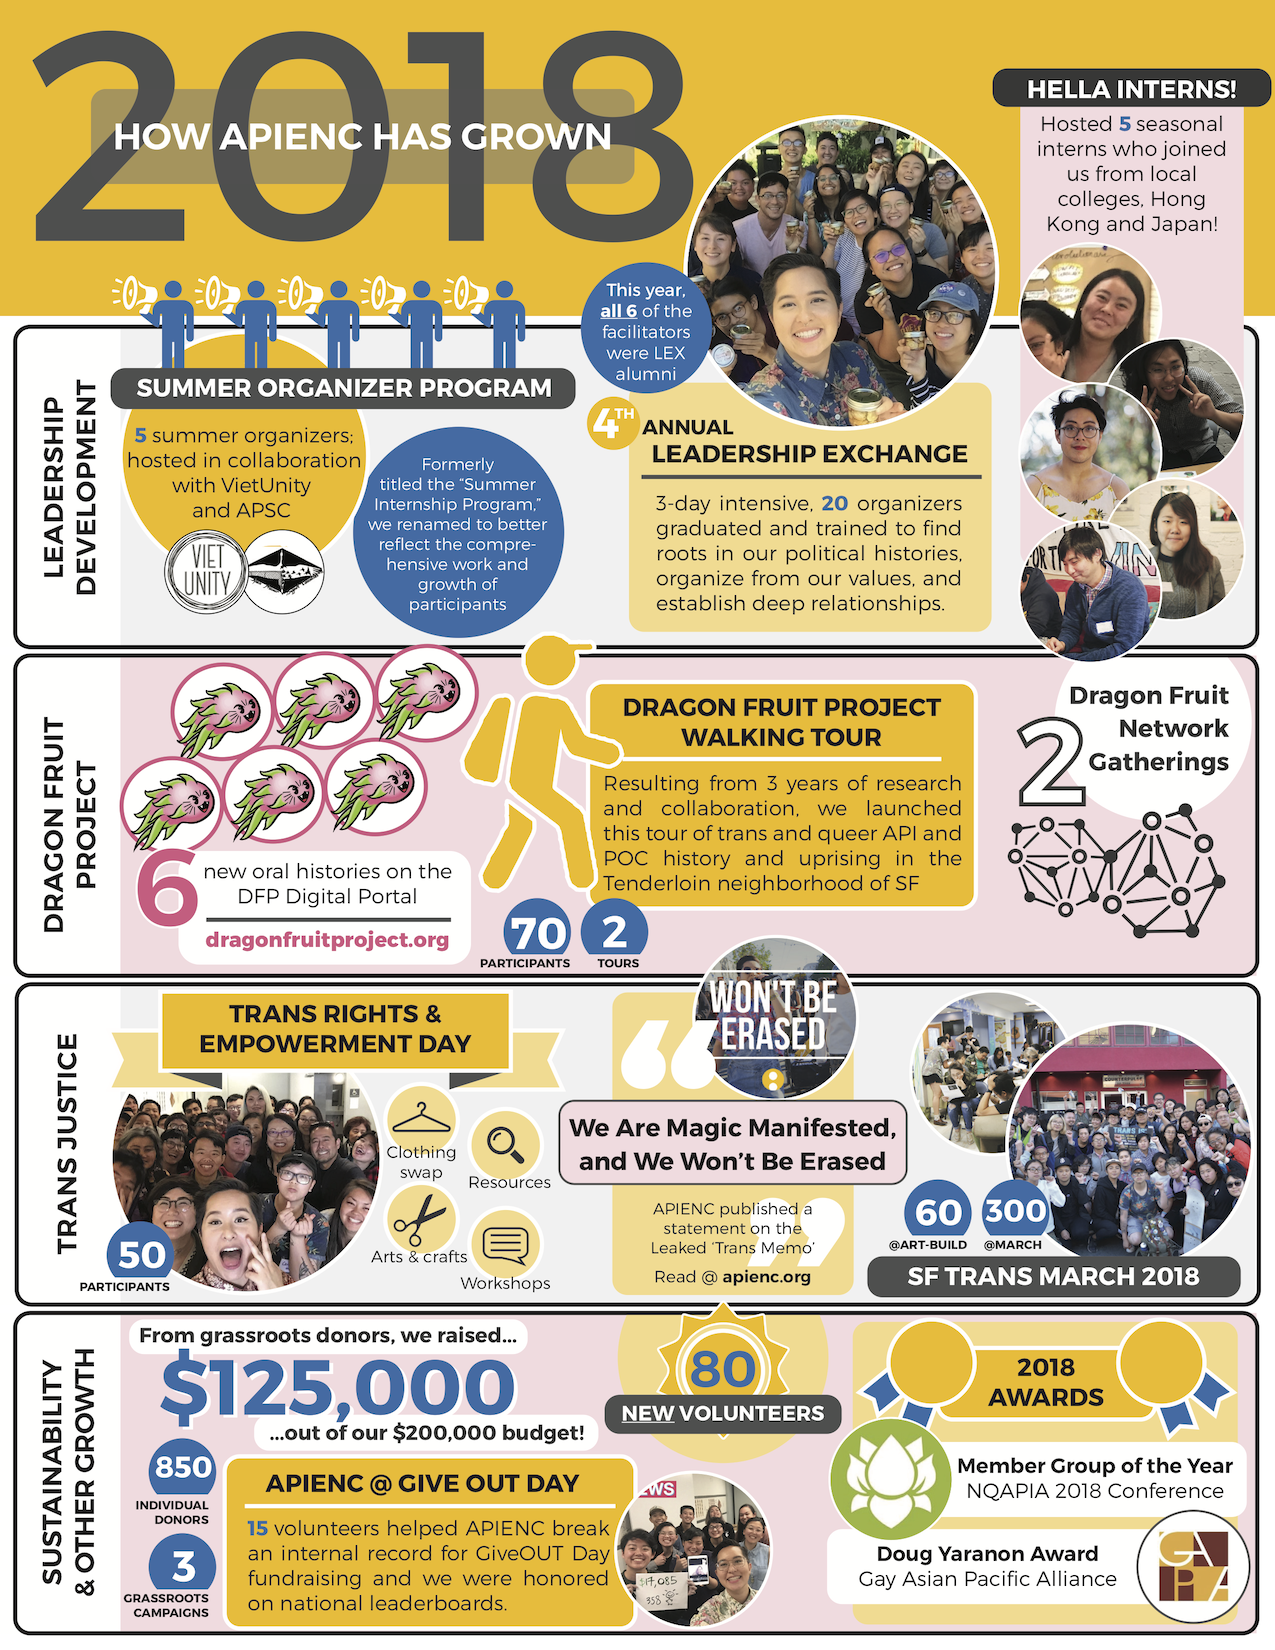 Image description: colorful infographic titled "2018: How APIENC Has Grown", describing accomplishments in Leadership Development, Dragon Fruit Project, and Trans Justice.